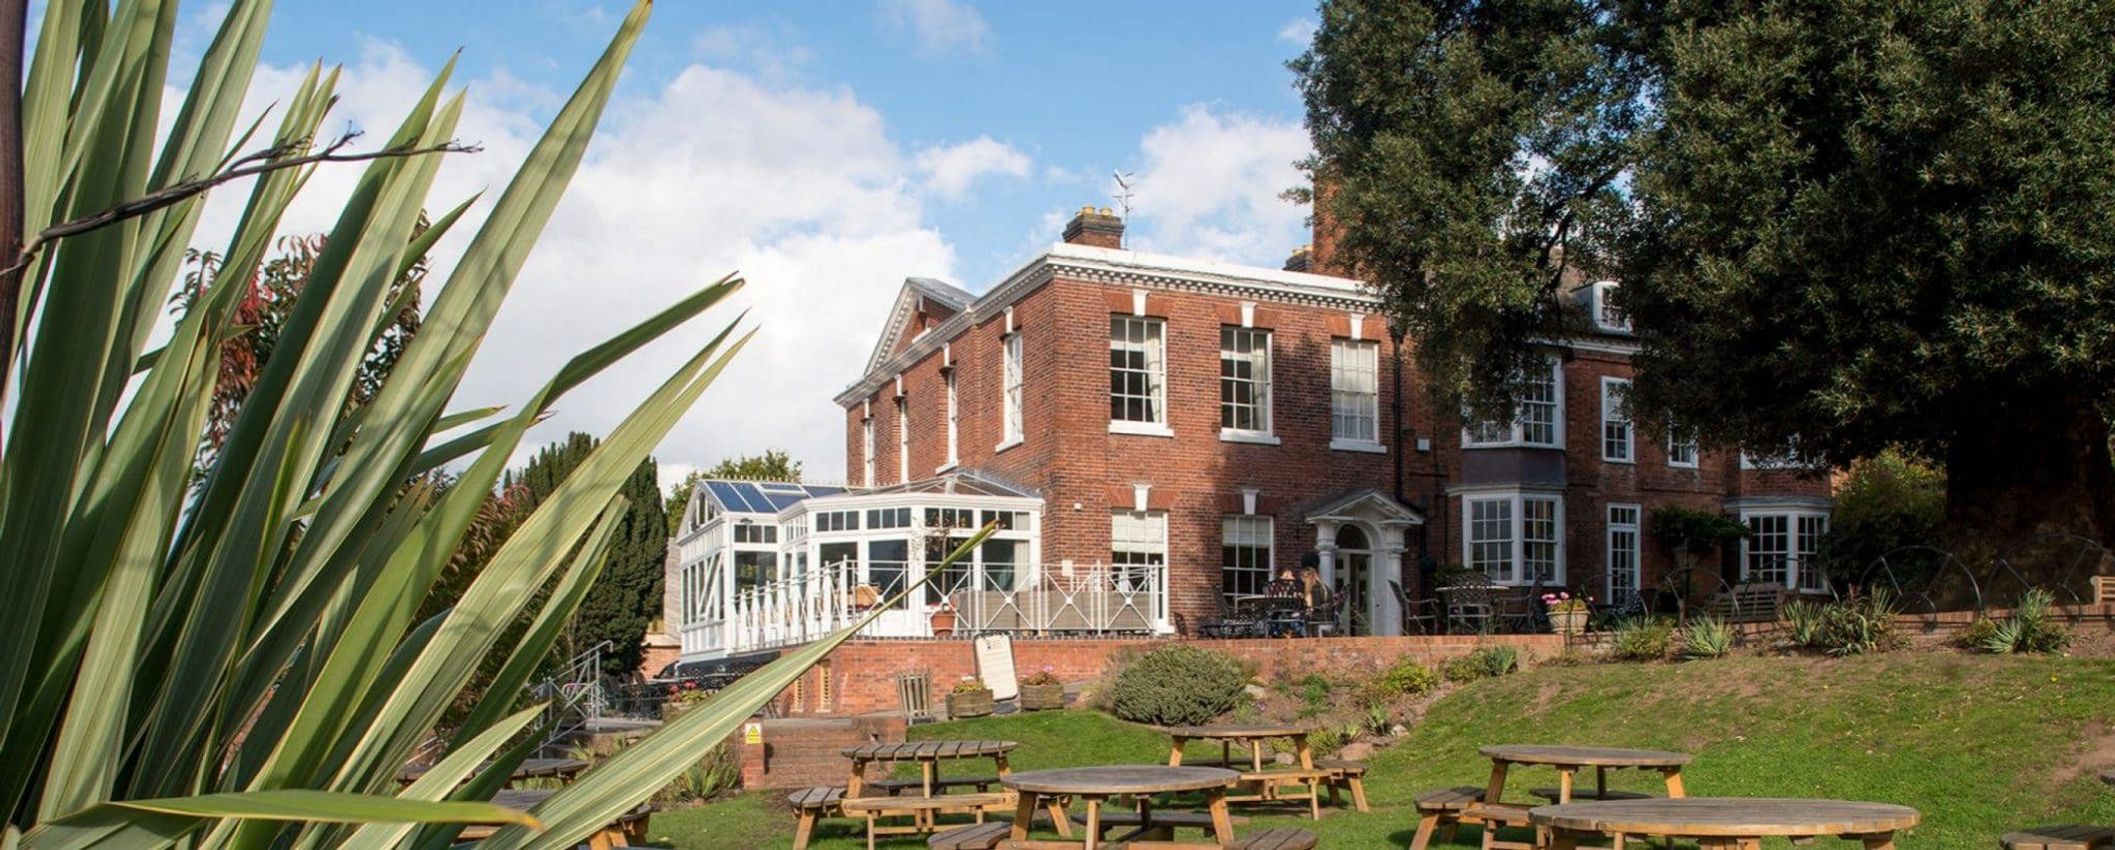 The Diglis House Hotel, Severn Street, Worcester, Worcestershire, WR1 2NF